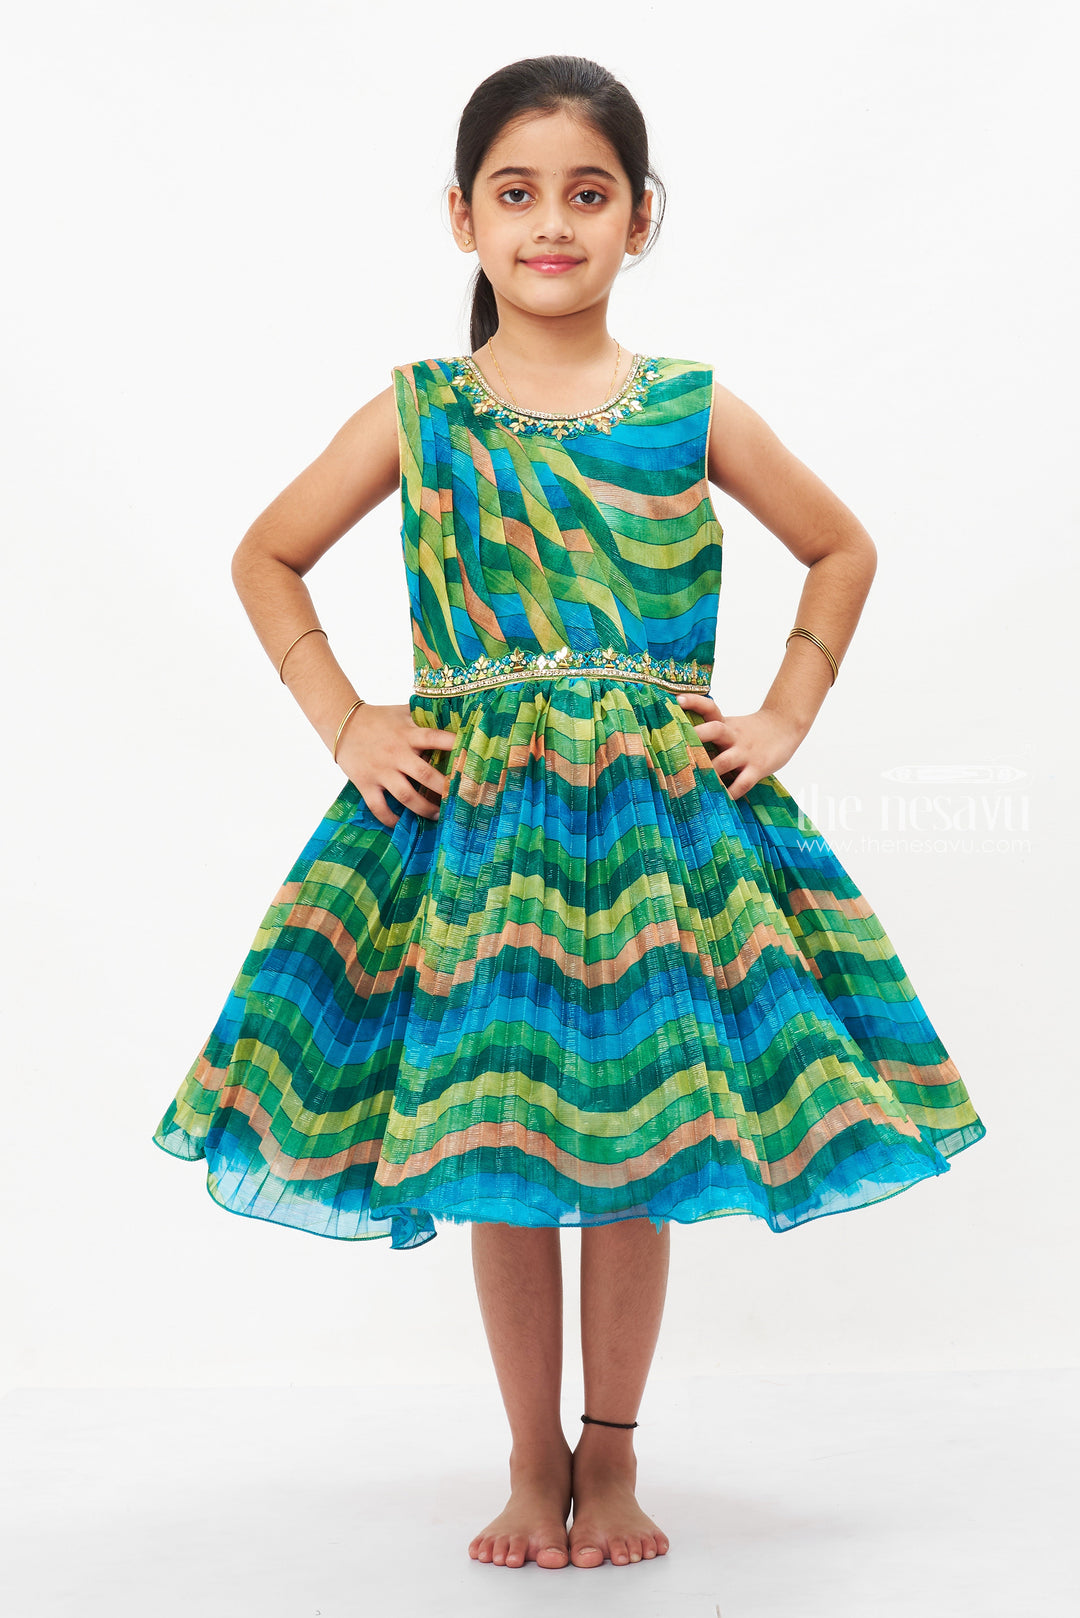 The Nesavu Silk Party Frock Girls Wave-Patterned Silk Frock - Custom Pattu Elegance for Parties and Celebrations Nesavu 18 (2Y) / Green / Georgette SF752A-18 Shop Unique Wave-Patterned Girls Pattu Silk Frocks | New Party Wear Collection | The Nesavu